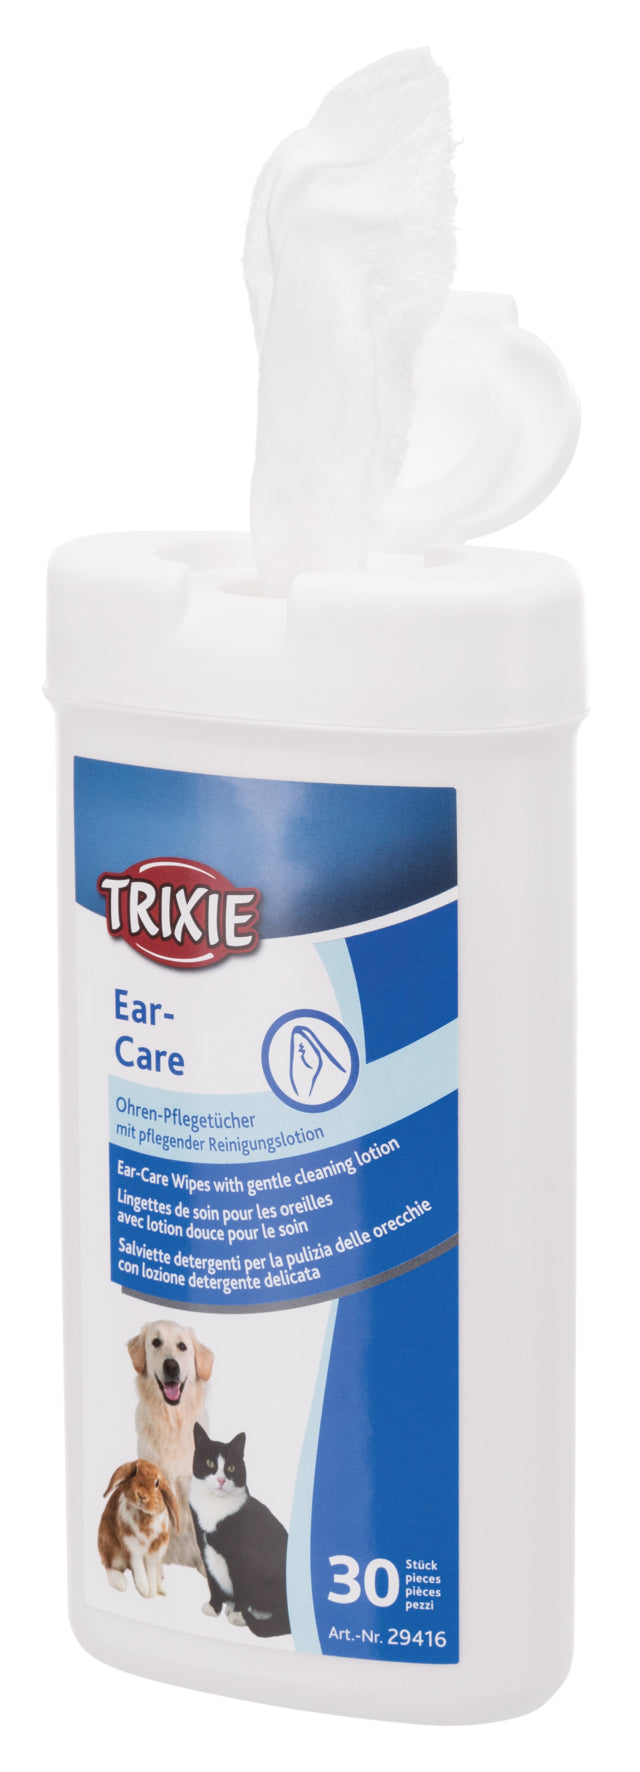 Trixie Ear Care Wipes - Pack of 2